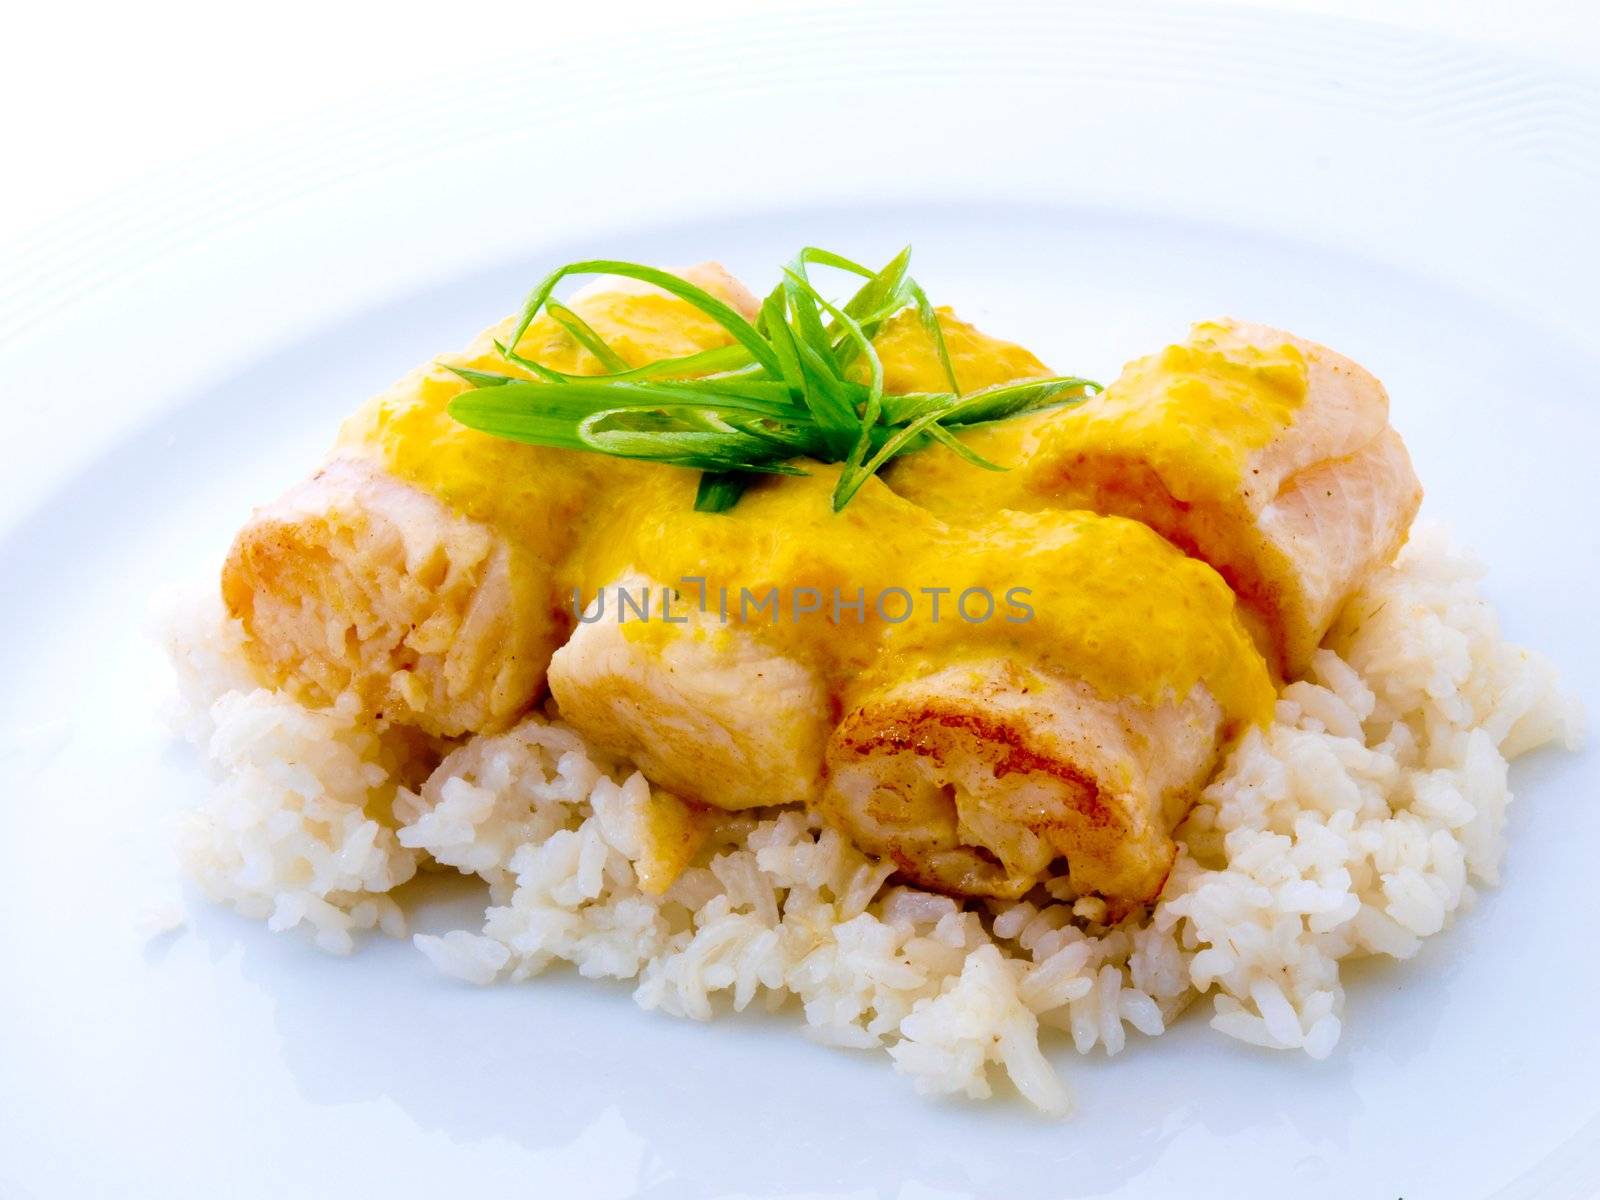  Rolled fish with rice on white background